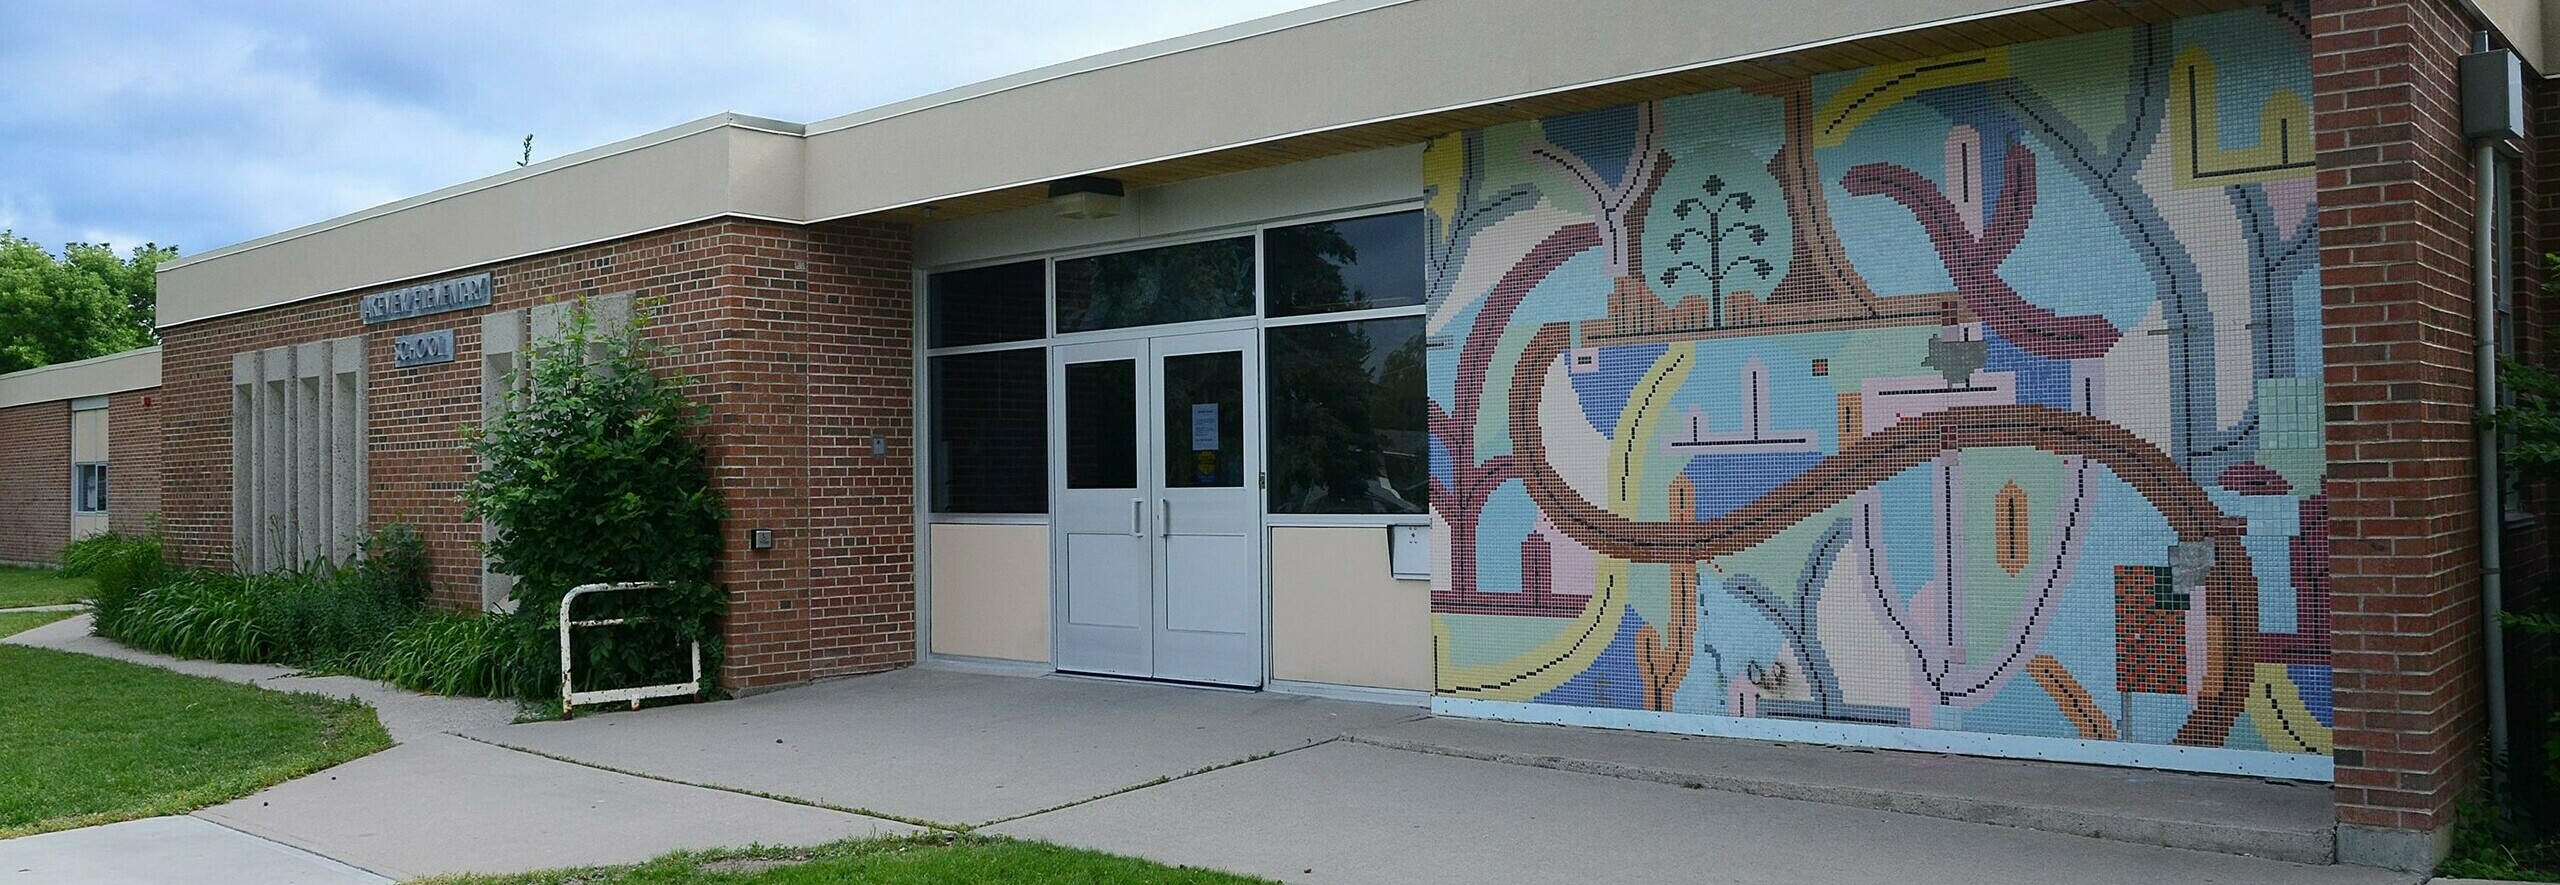 Lakeview Elementary School Banner Photo